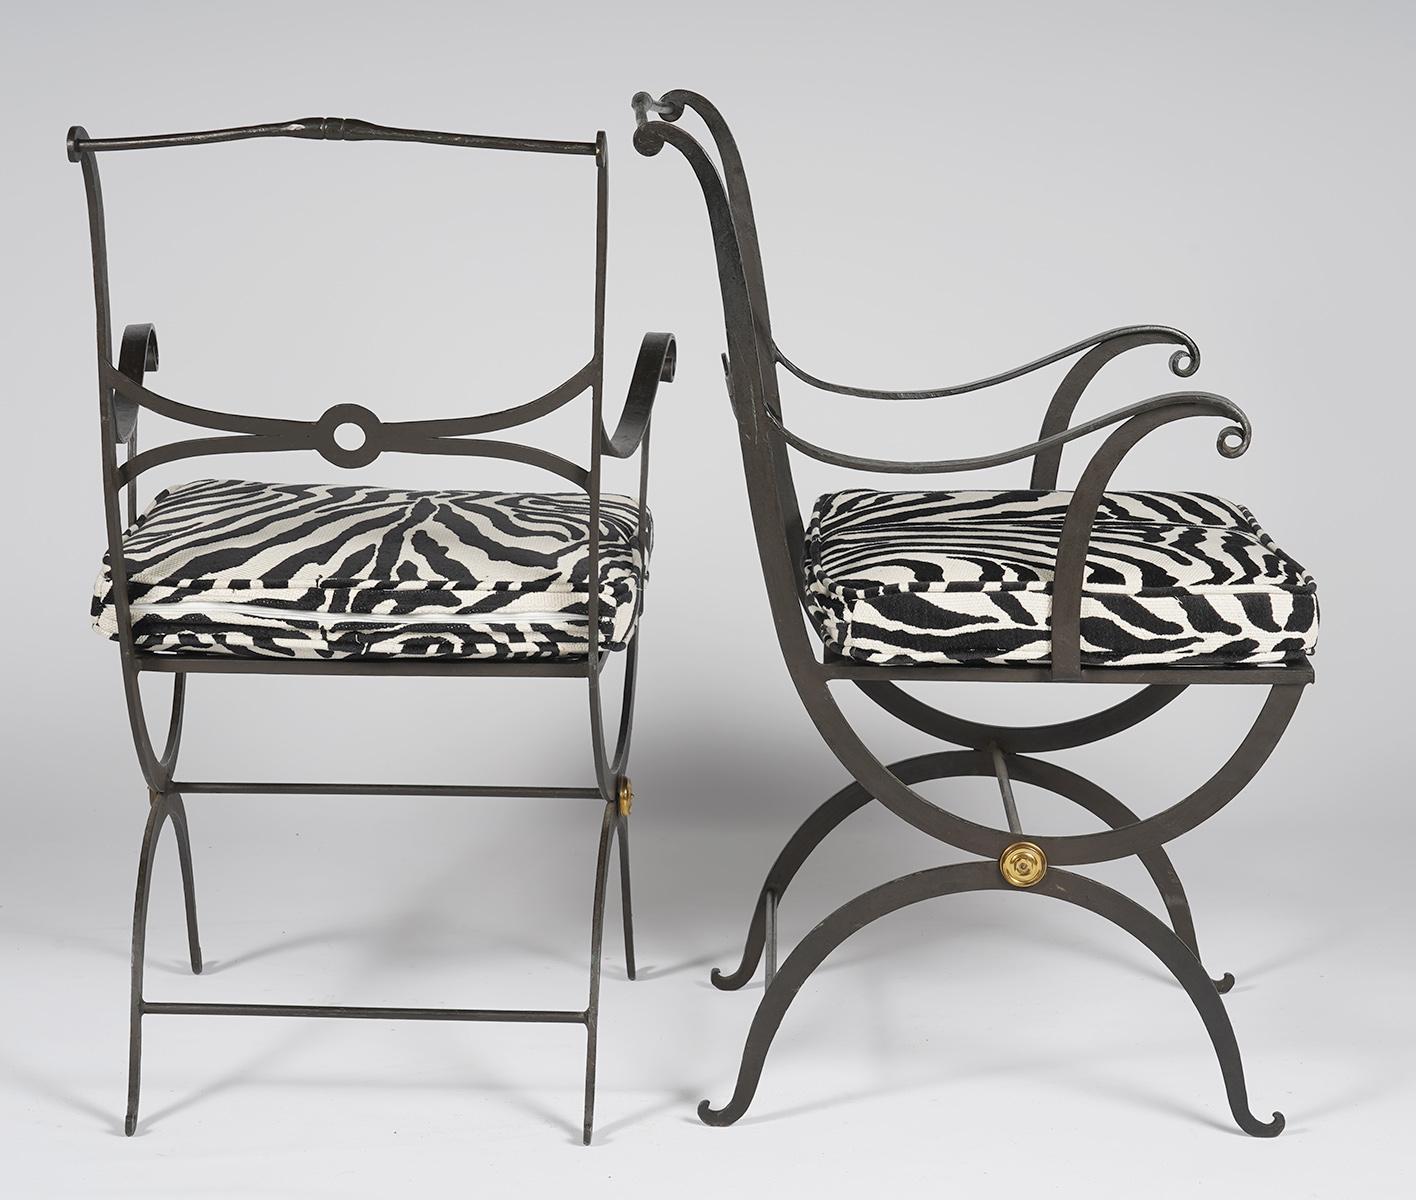 This pair of painted wrought iron stylized Regency armchairs feature Curule style legs centering brass rosettes and elegantly designed backrests. The recent custom made zebra pattern cushions make the combination 'tres chic'. The chairs date to the